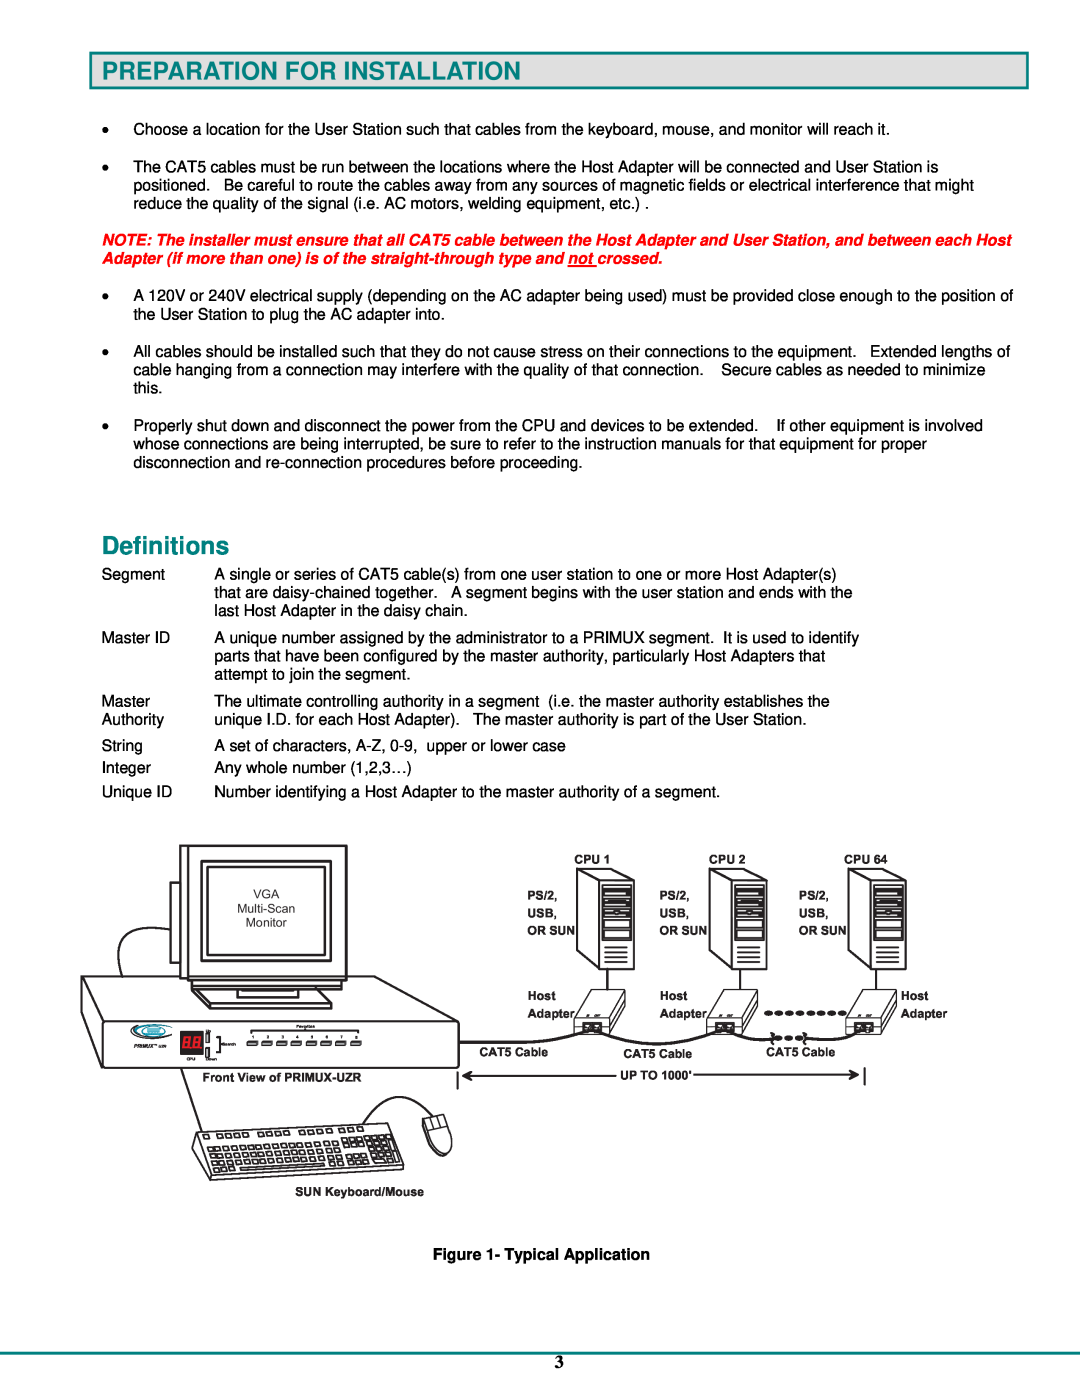 Network Technologies CAT5 operation manual Preparation For Installation, Definitions, Typical Application 